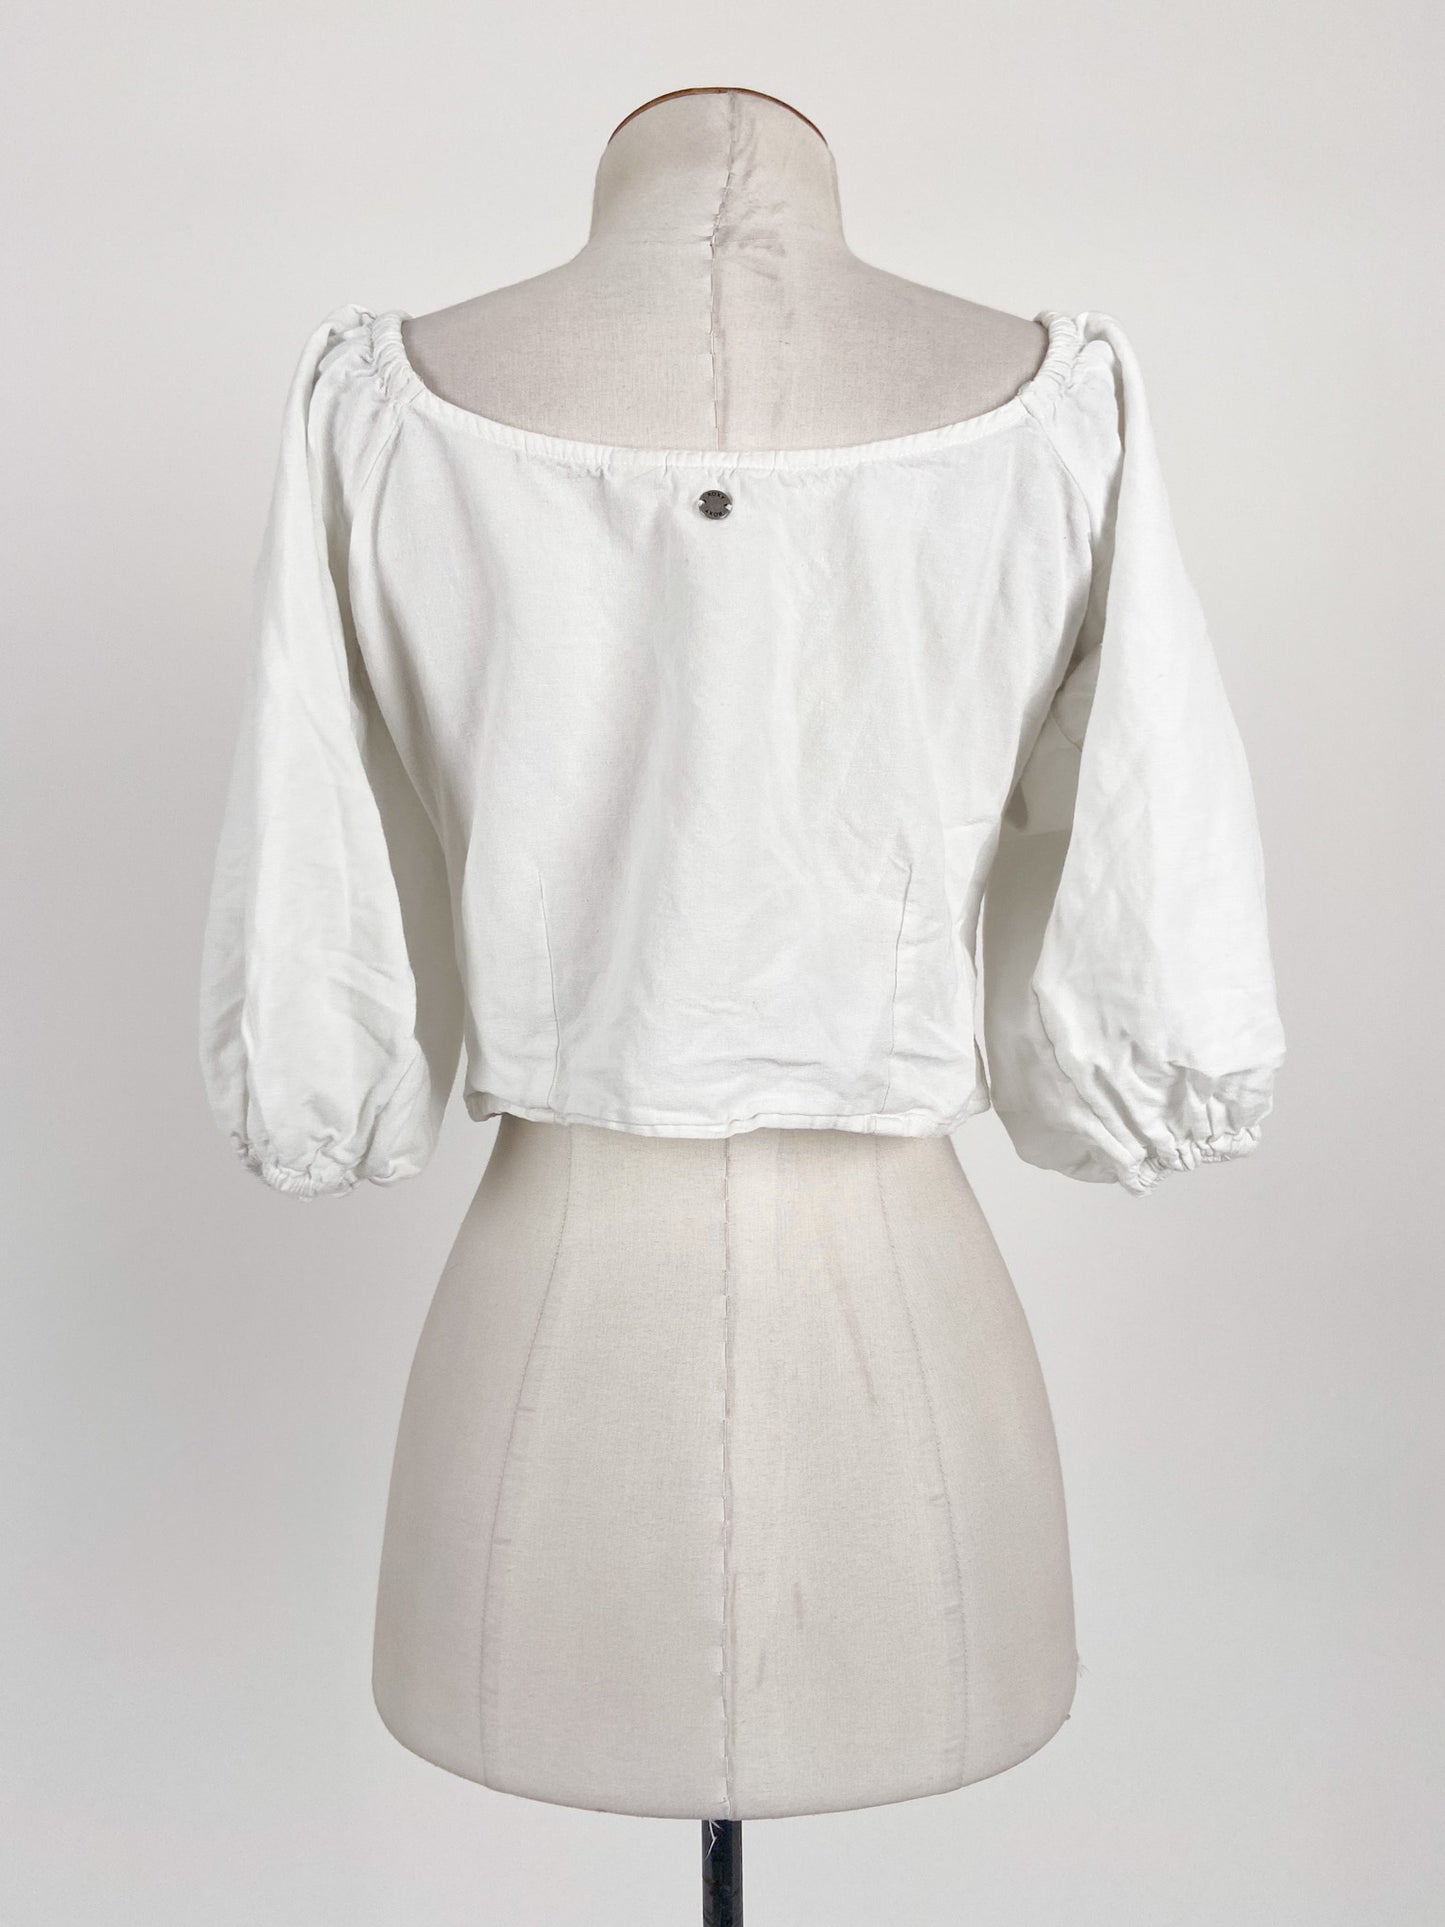 Roxy | White Casual/Workwear Top | Size S